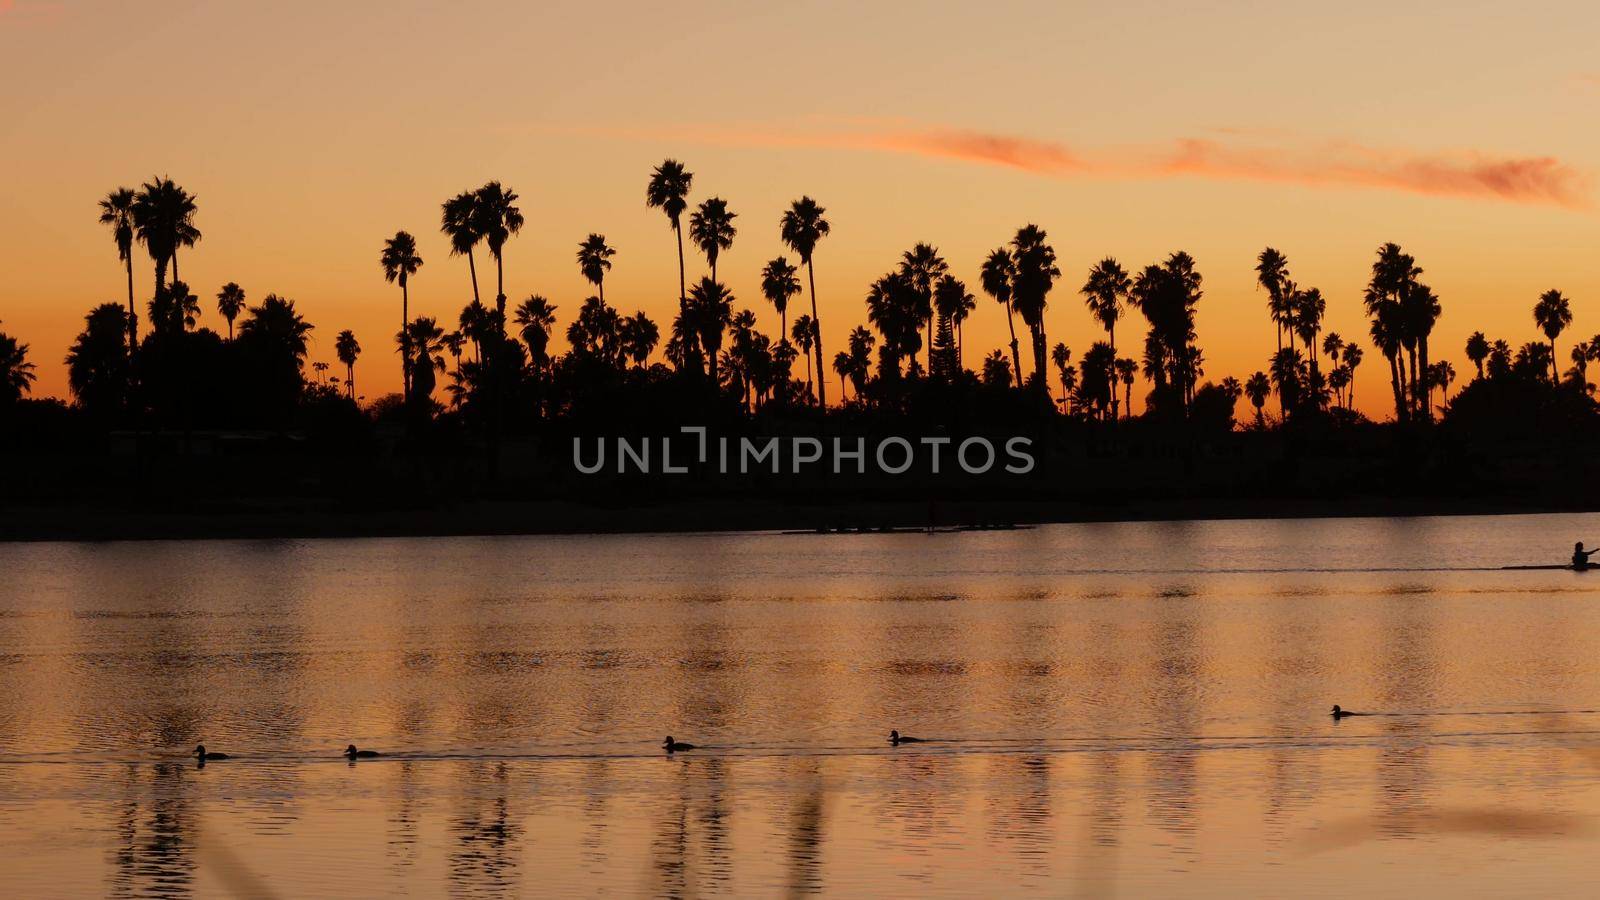 Palm trees silhouettes on sunset ocean beach, California coast, USA. Reflection of purple pink orange sky in calm water of Mission Bay Park, San Diego. People kayaking, paddling, rowing or canoeing.